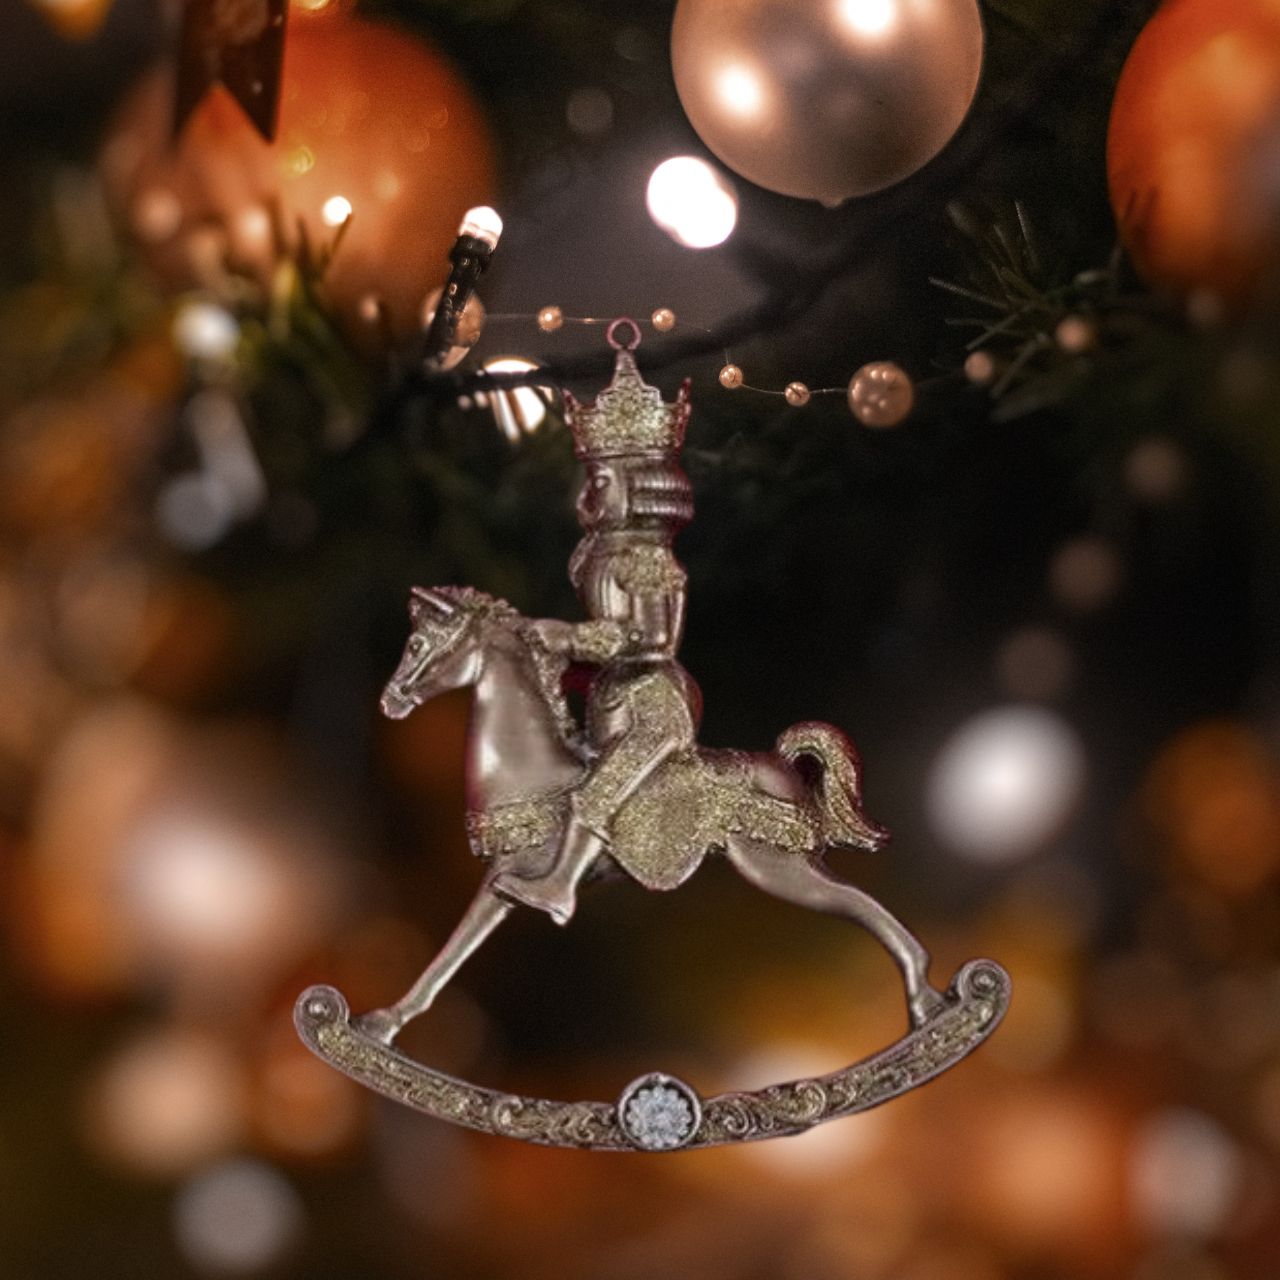 Rocking Horse Christmas Tree Ornament by Genesis  Gorgeous bronze coloured Christmas tree ornament by Genesis Ireland. With glittering gold accents, this ornament is sure to bring a sparkle to your Christmas décor.